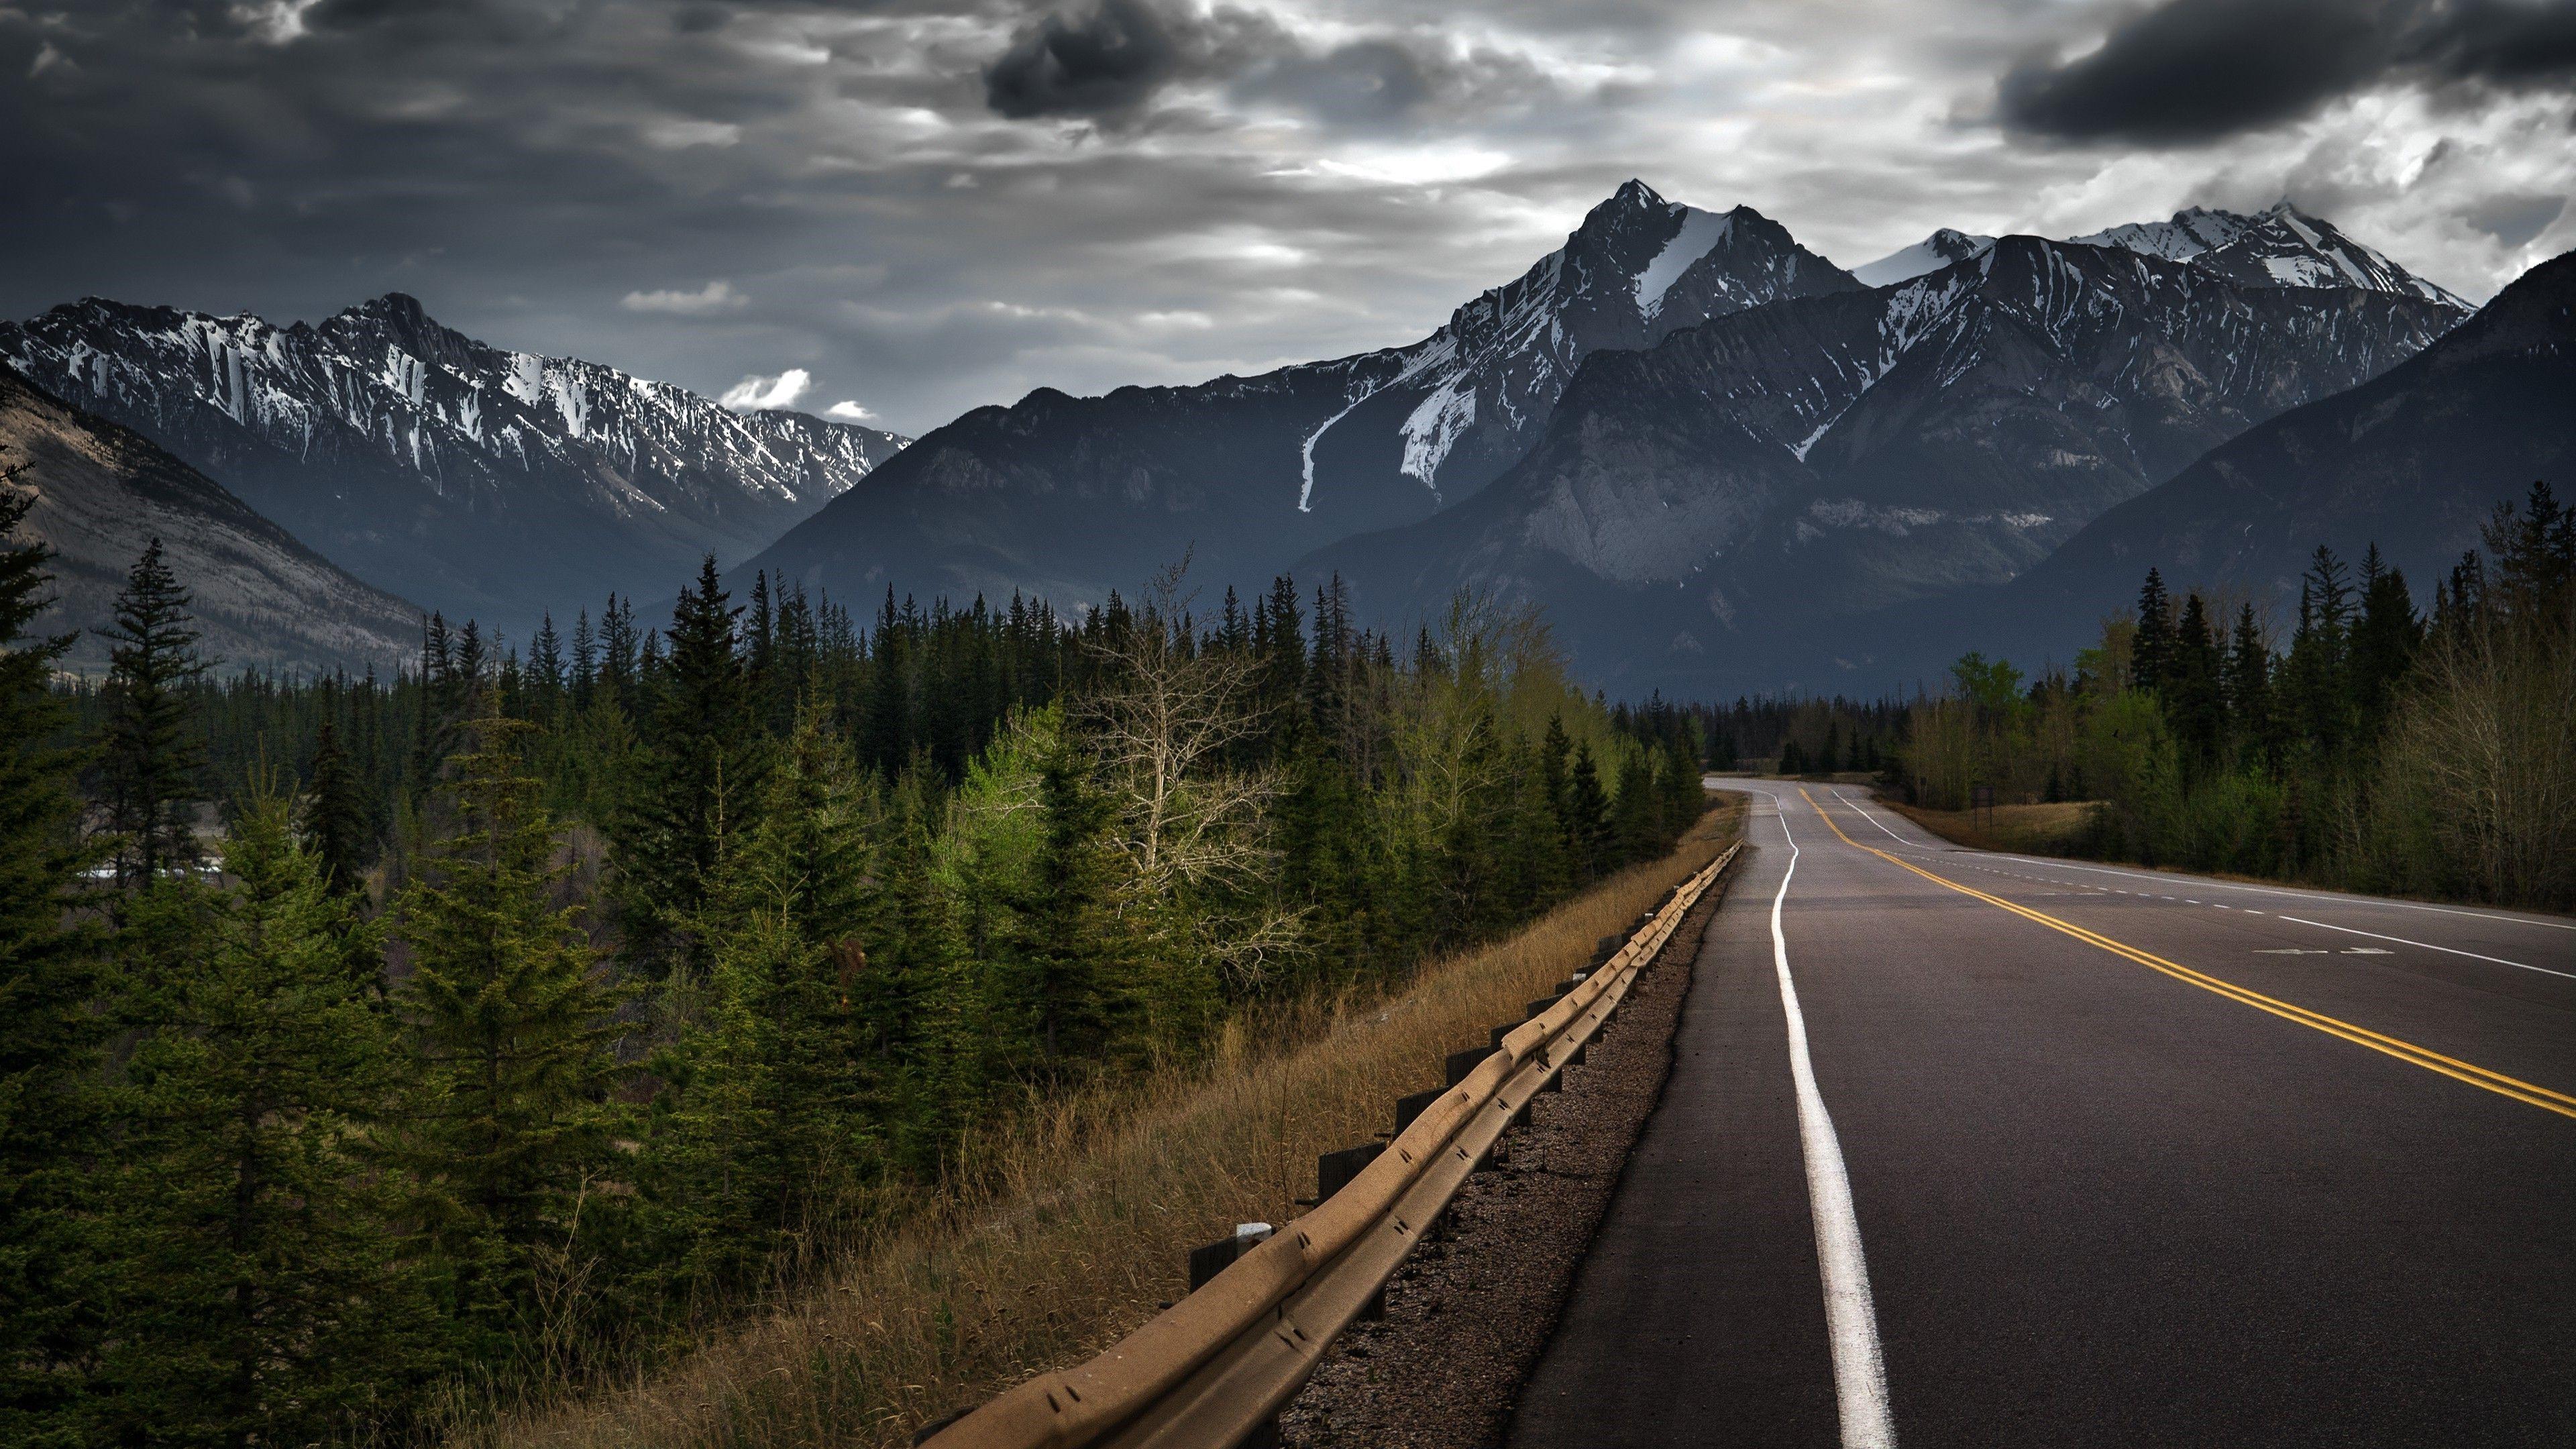 4k Mountain Road Wallpapers Top Free 4k Mountain Road Backgrounds